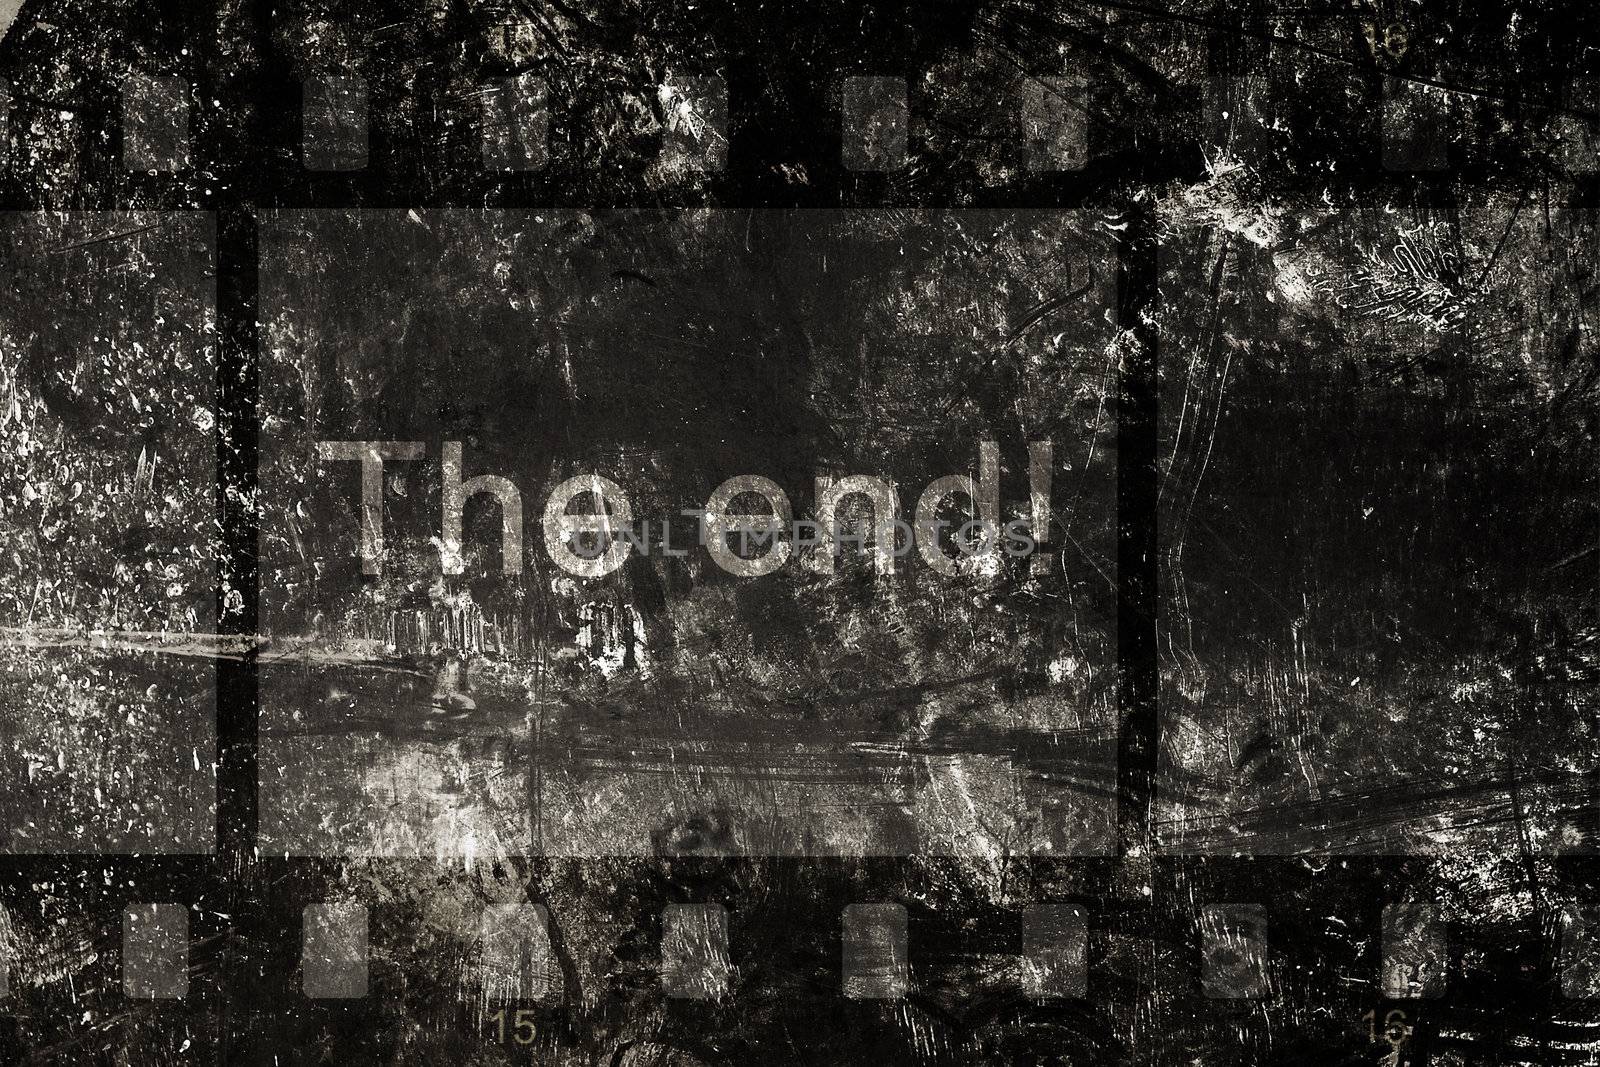 The end on a grunge background by petrkurgan